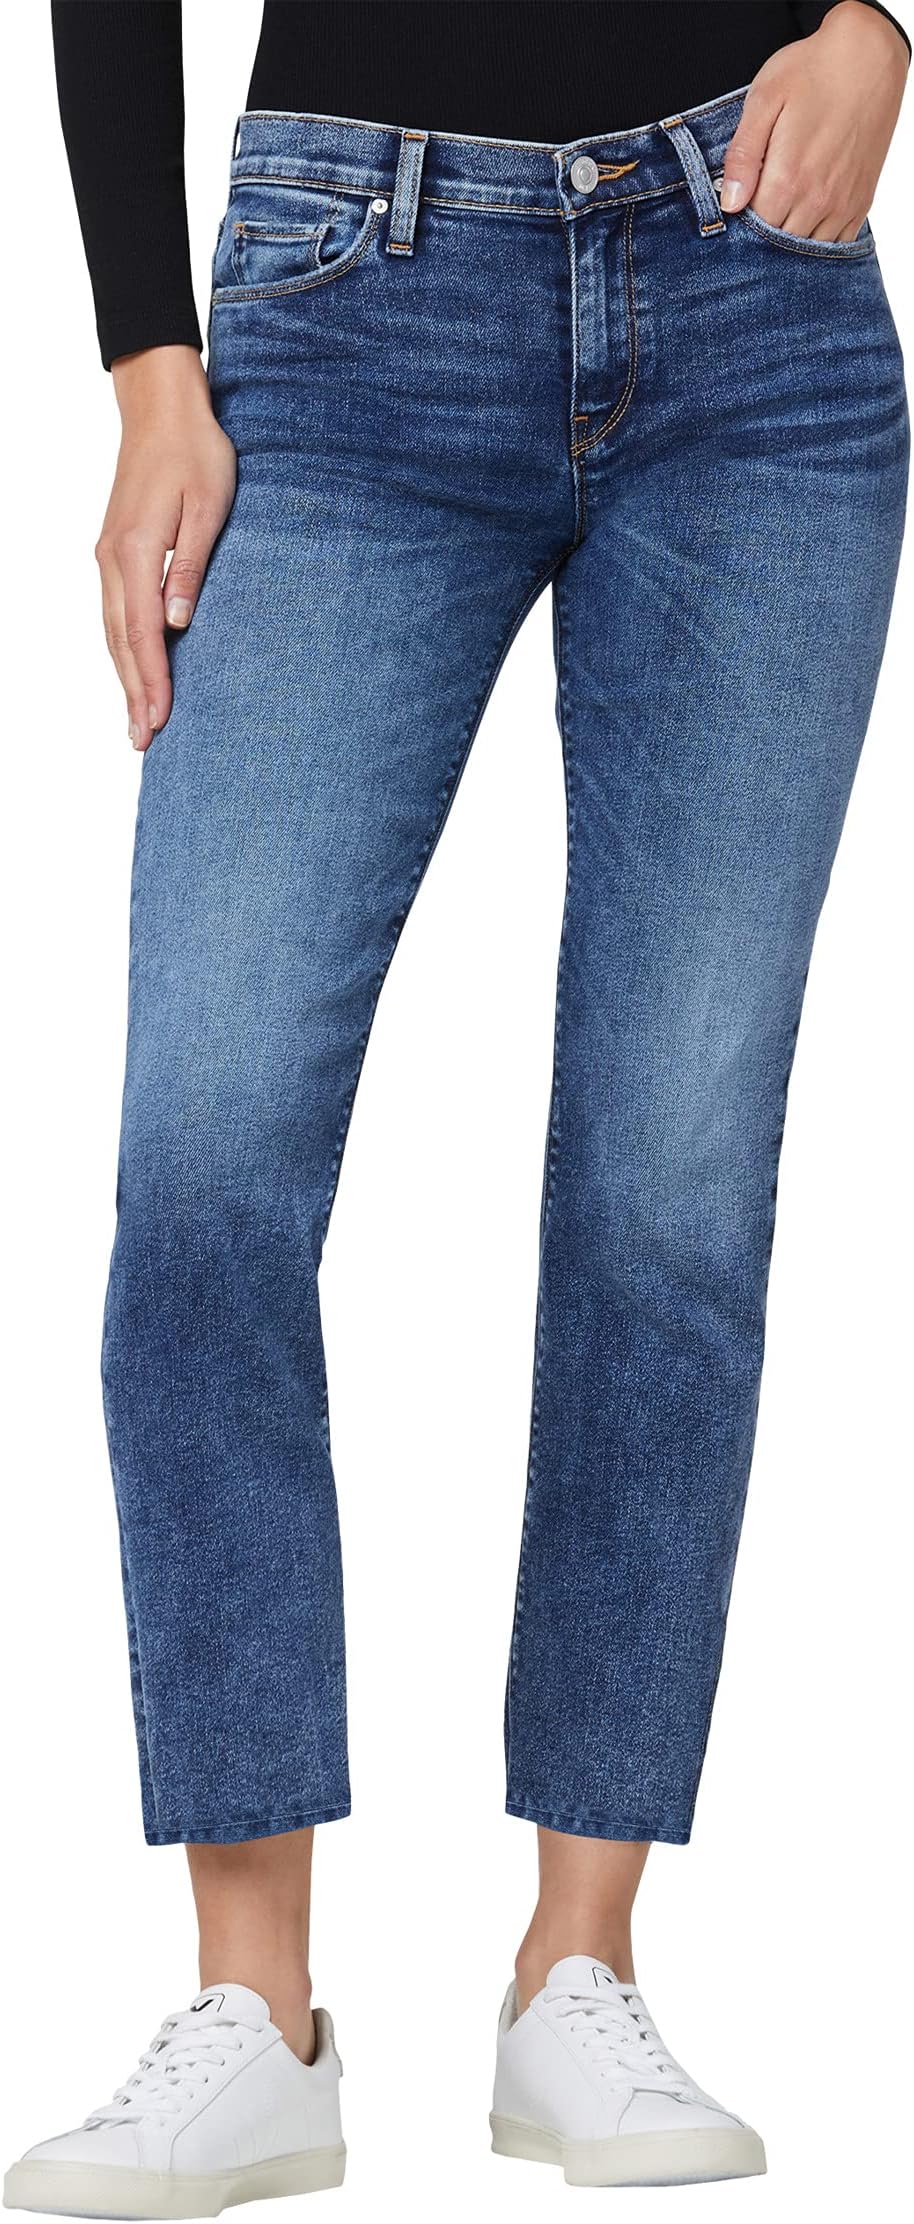 pennypacker s pax journey home Джинсы Nico Mid-Rise Straight Ankle in Journey Home Hudson Jeans, цвет Journey Home